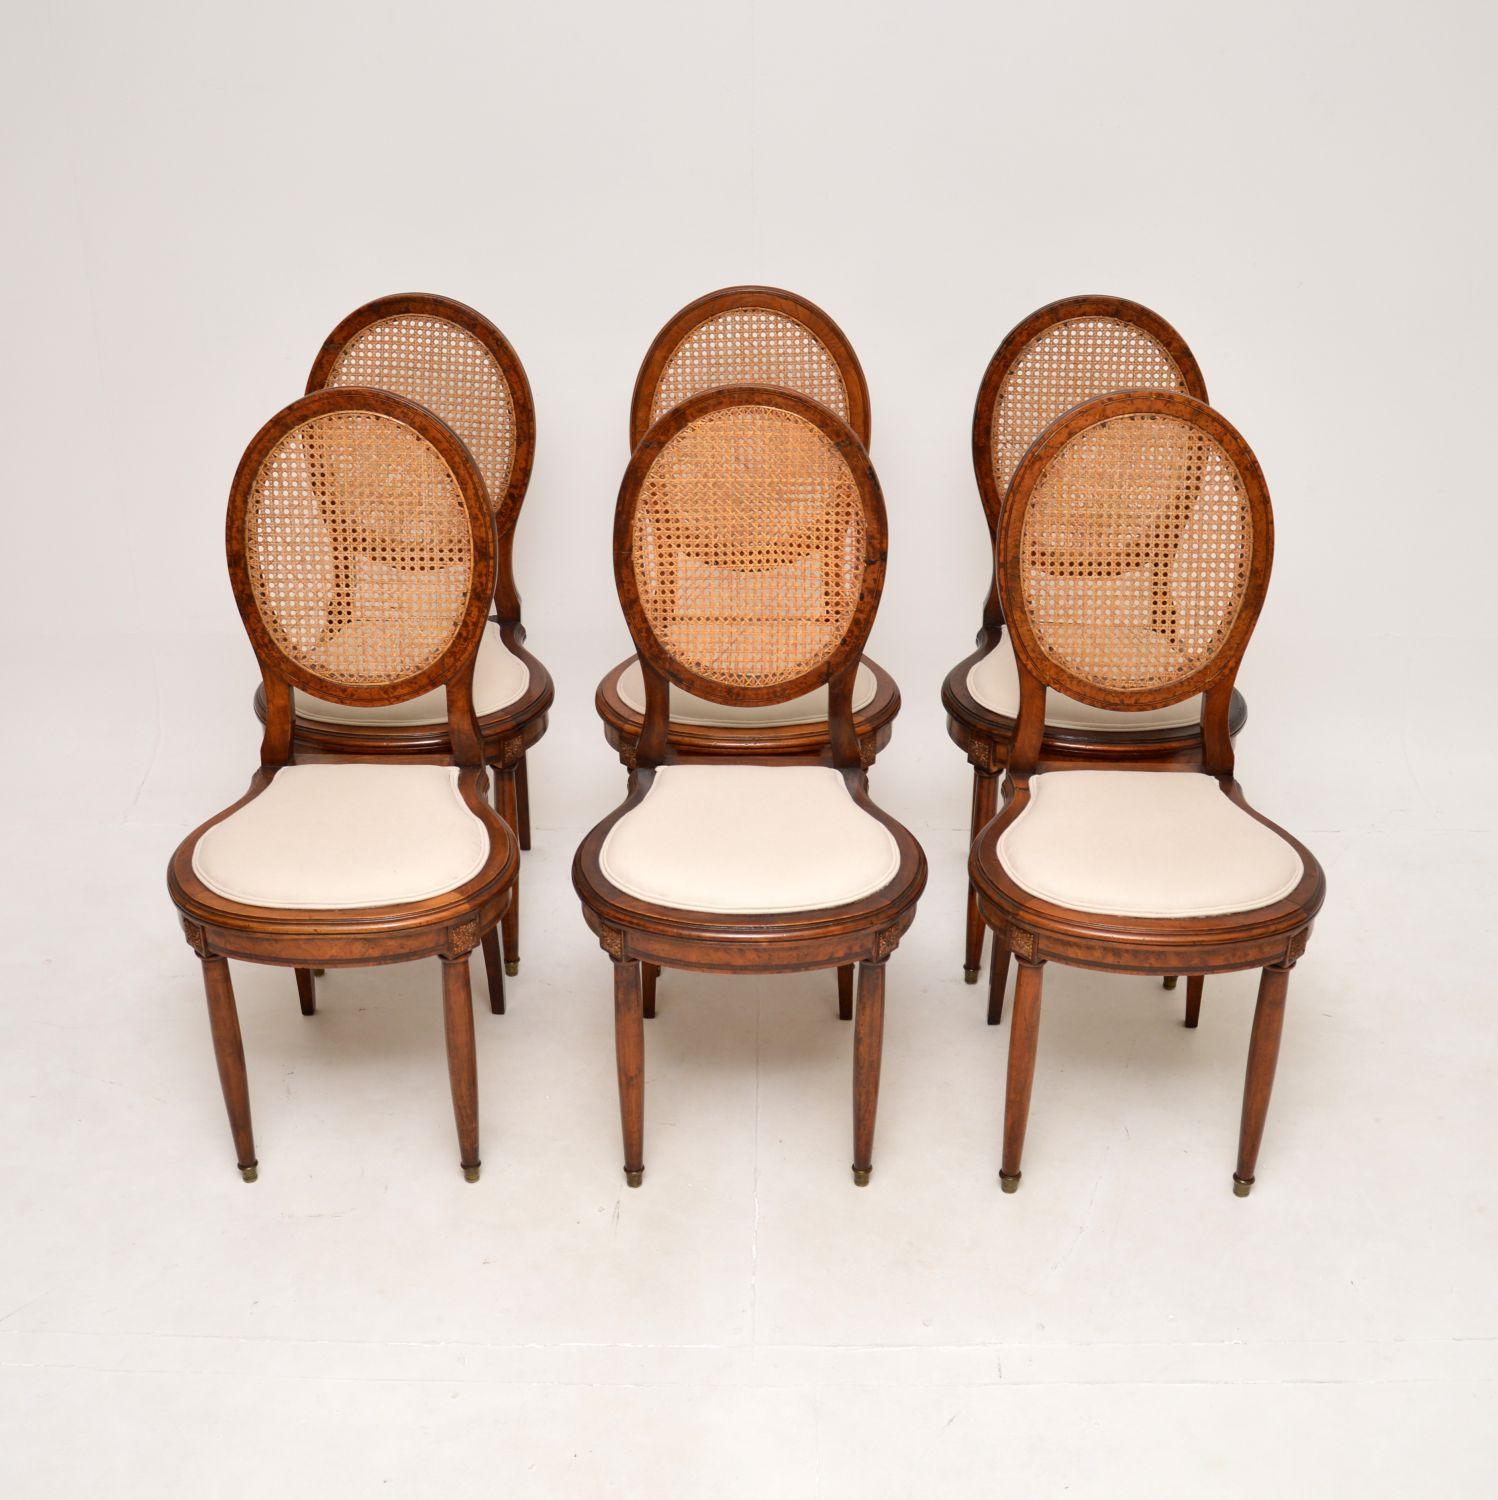 A stunning set of six antique French walnut cane back dining chairs. They were made in France, they date from around the 1890-1900 period.

The quality is superb, the oval shaped backs have lovely cane work. The chairs are solid walnut, with